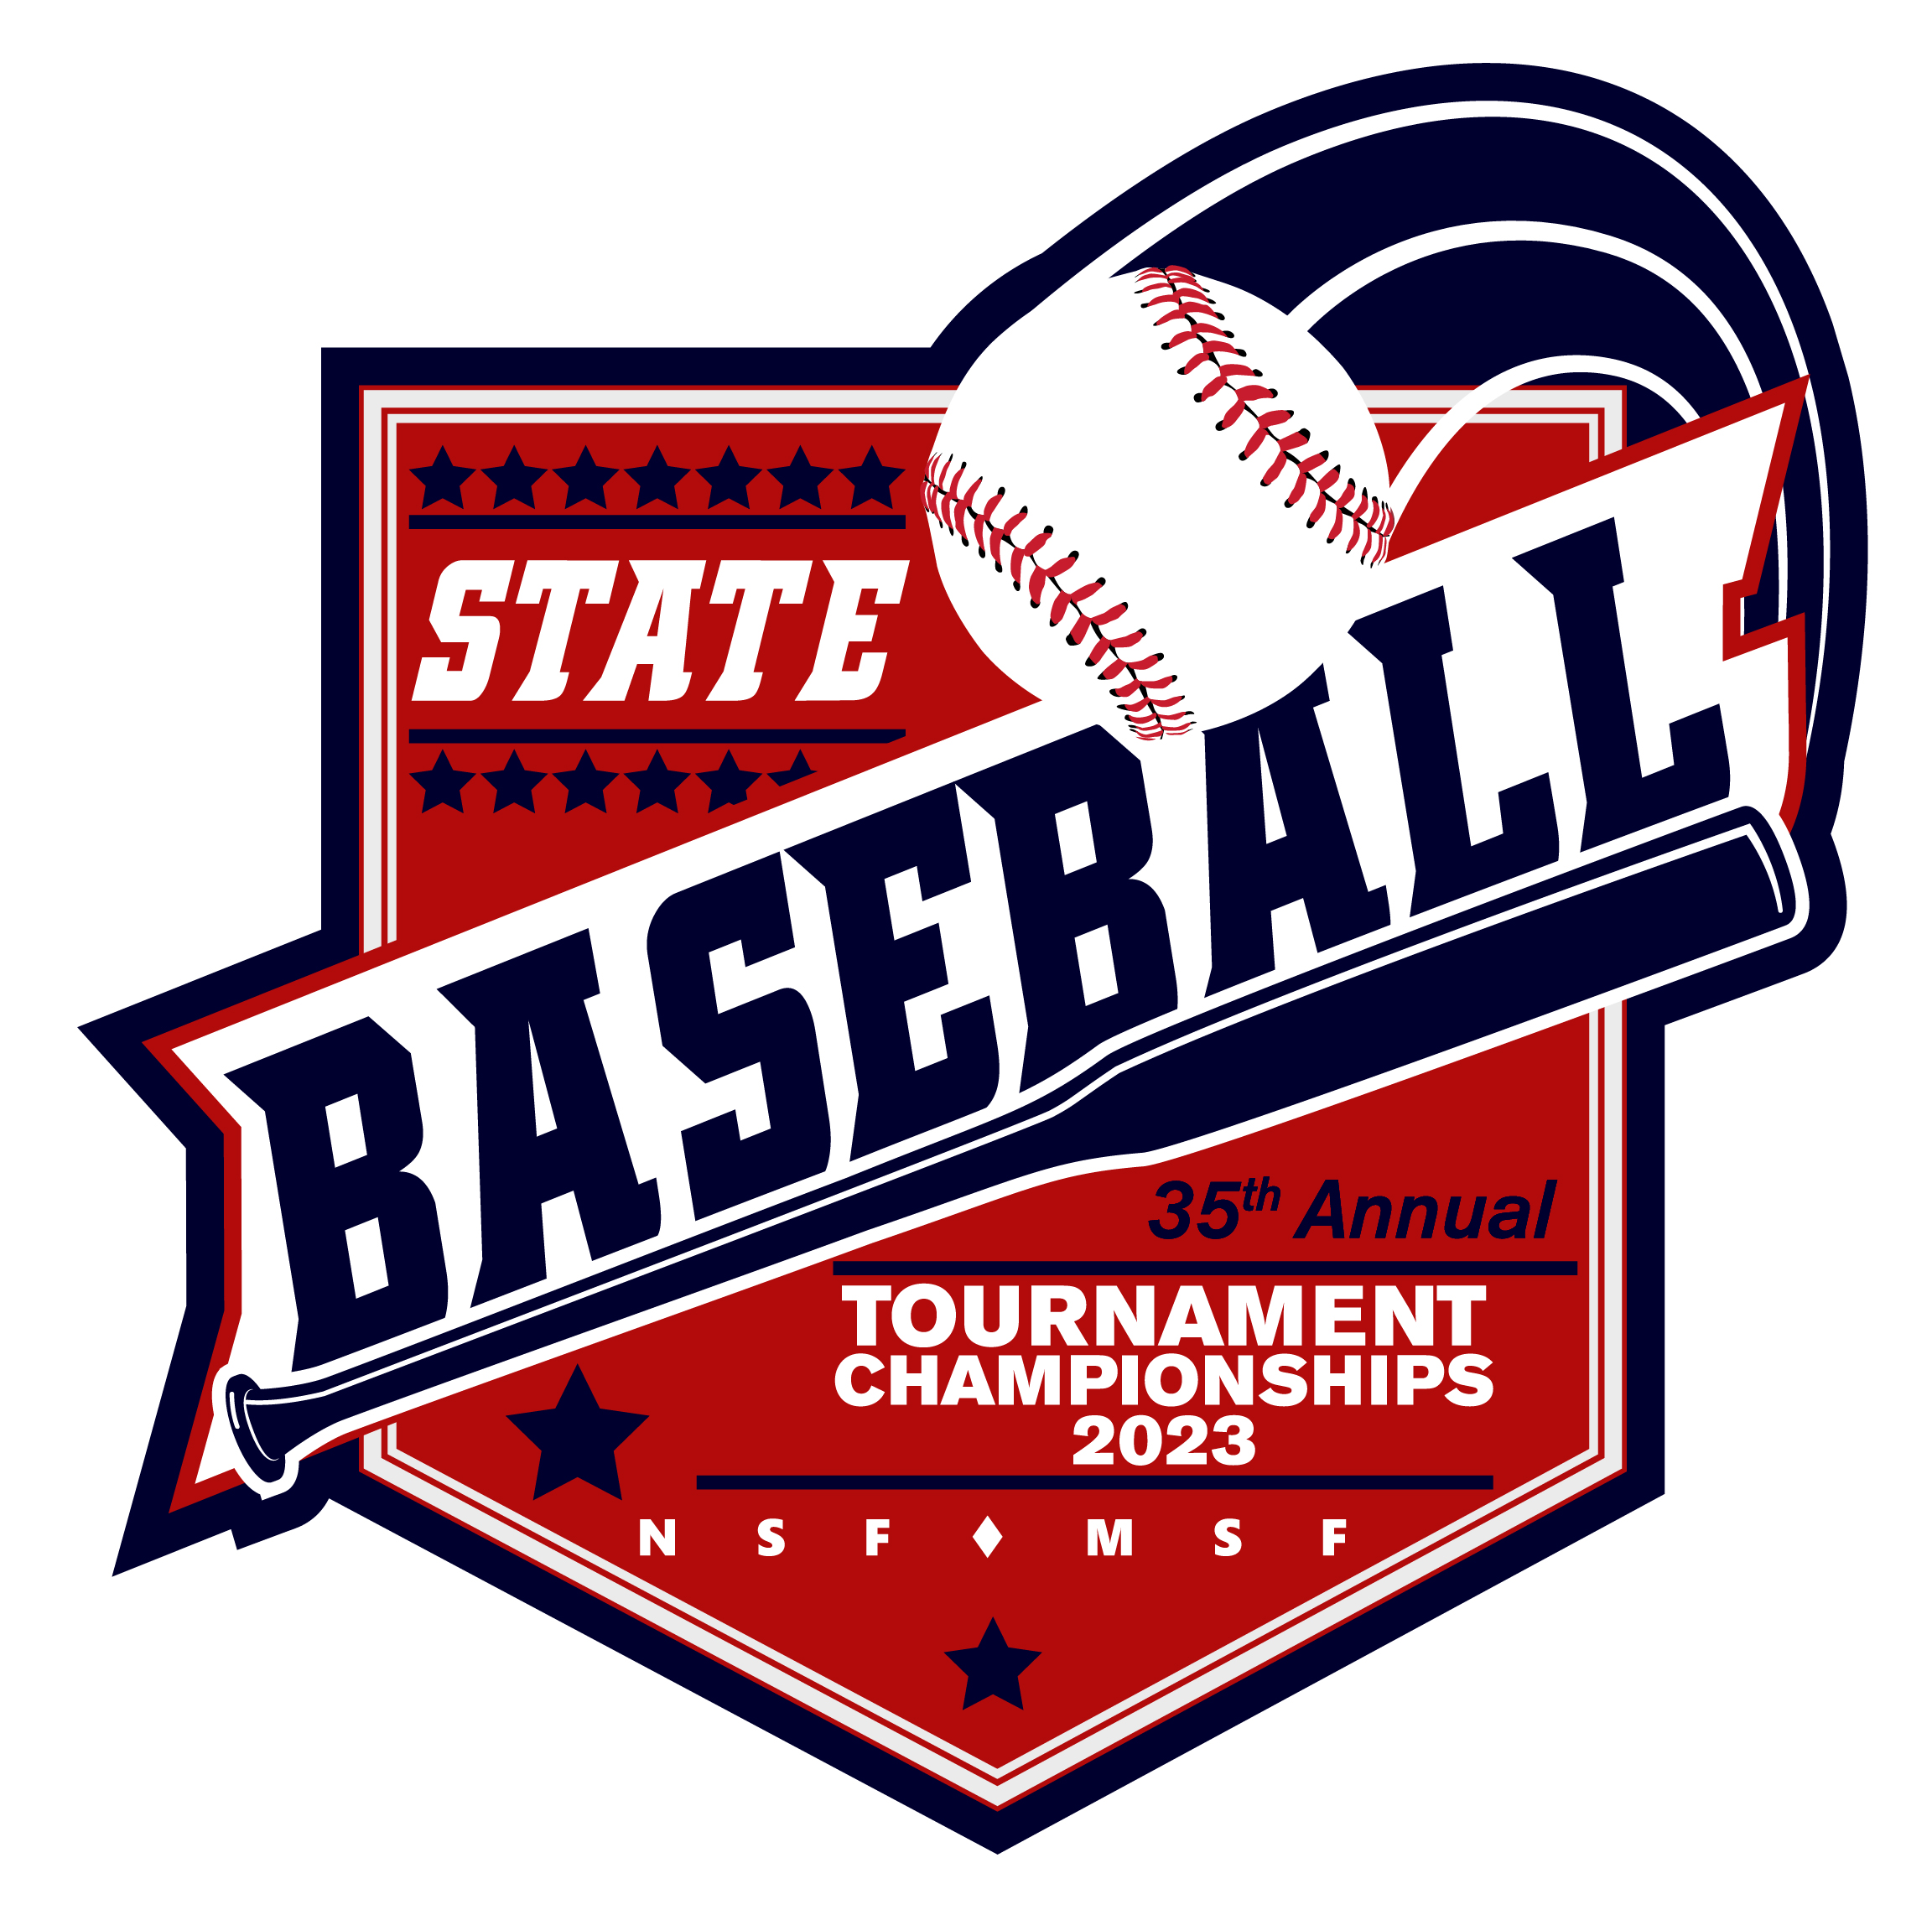 2023 YOUTH BASEBALL SCHEDULES POSTED!